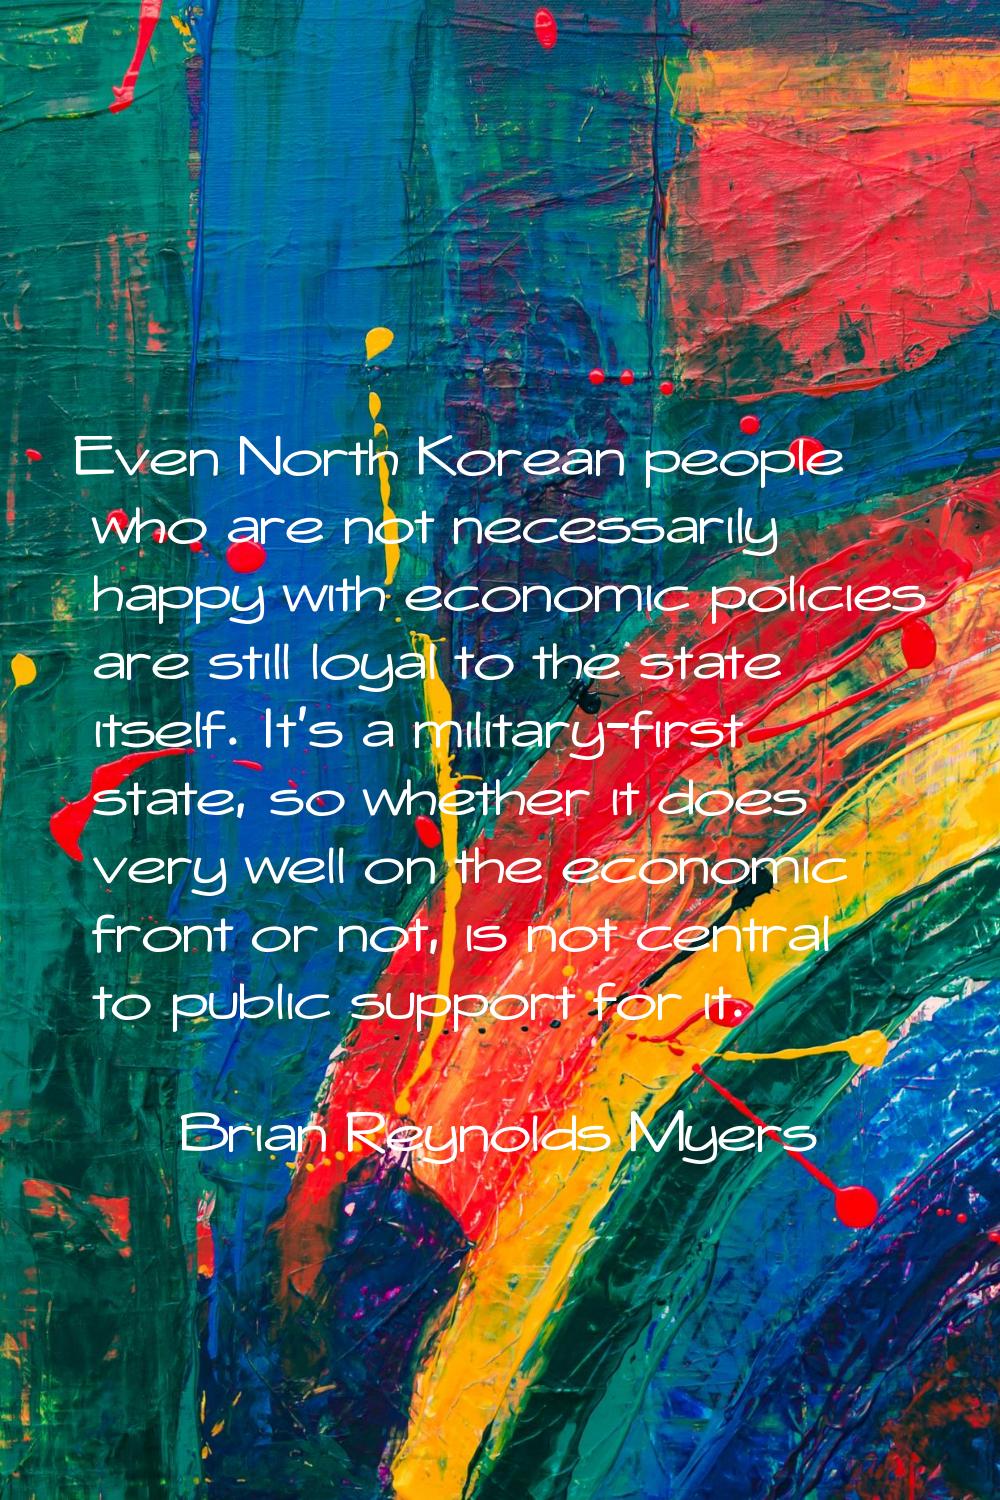 Even North Korean people who are not necessarily happy with economic policies are still loyal to th